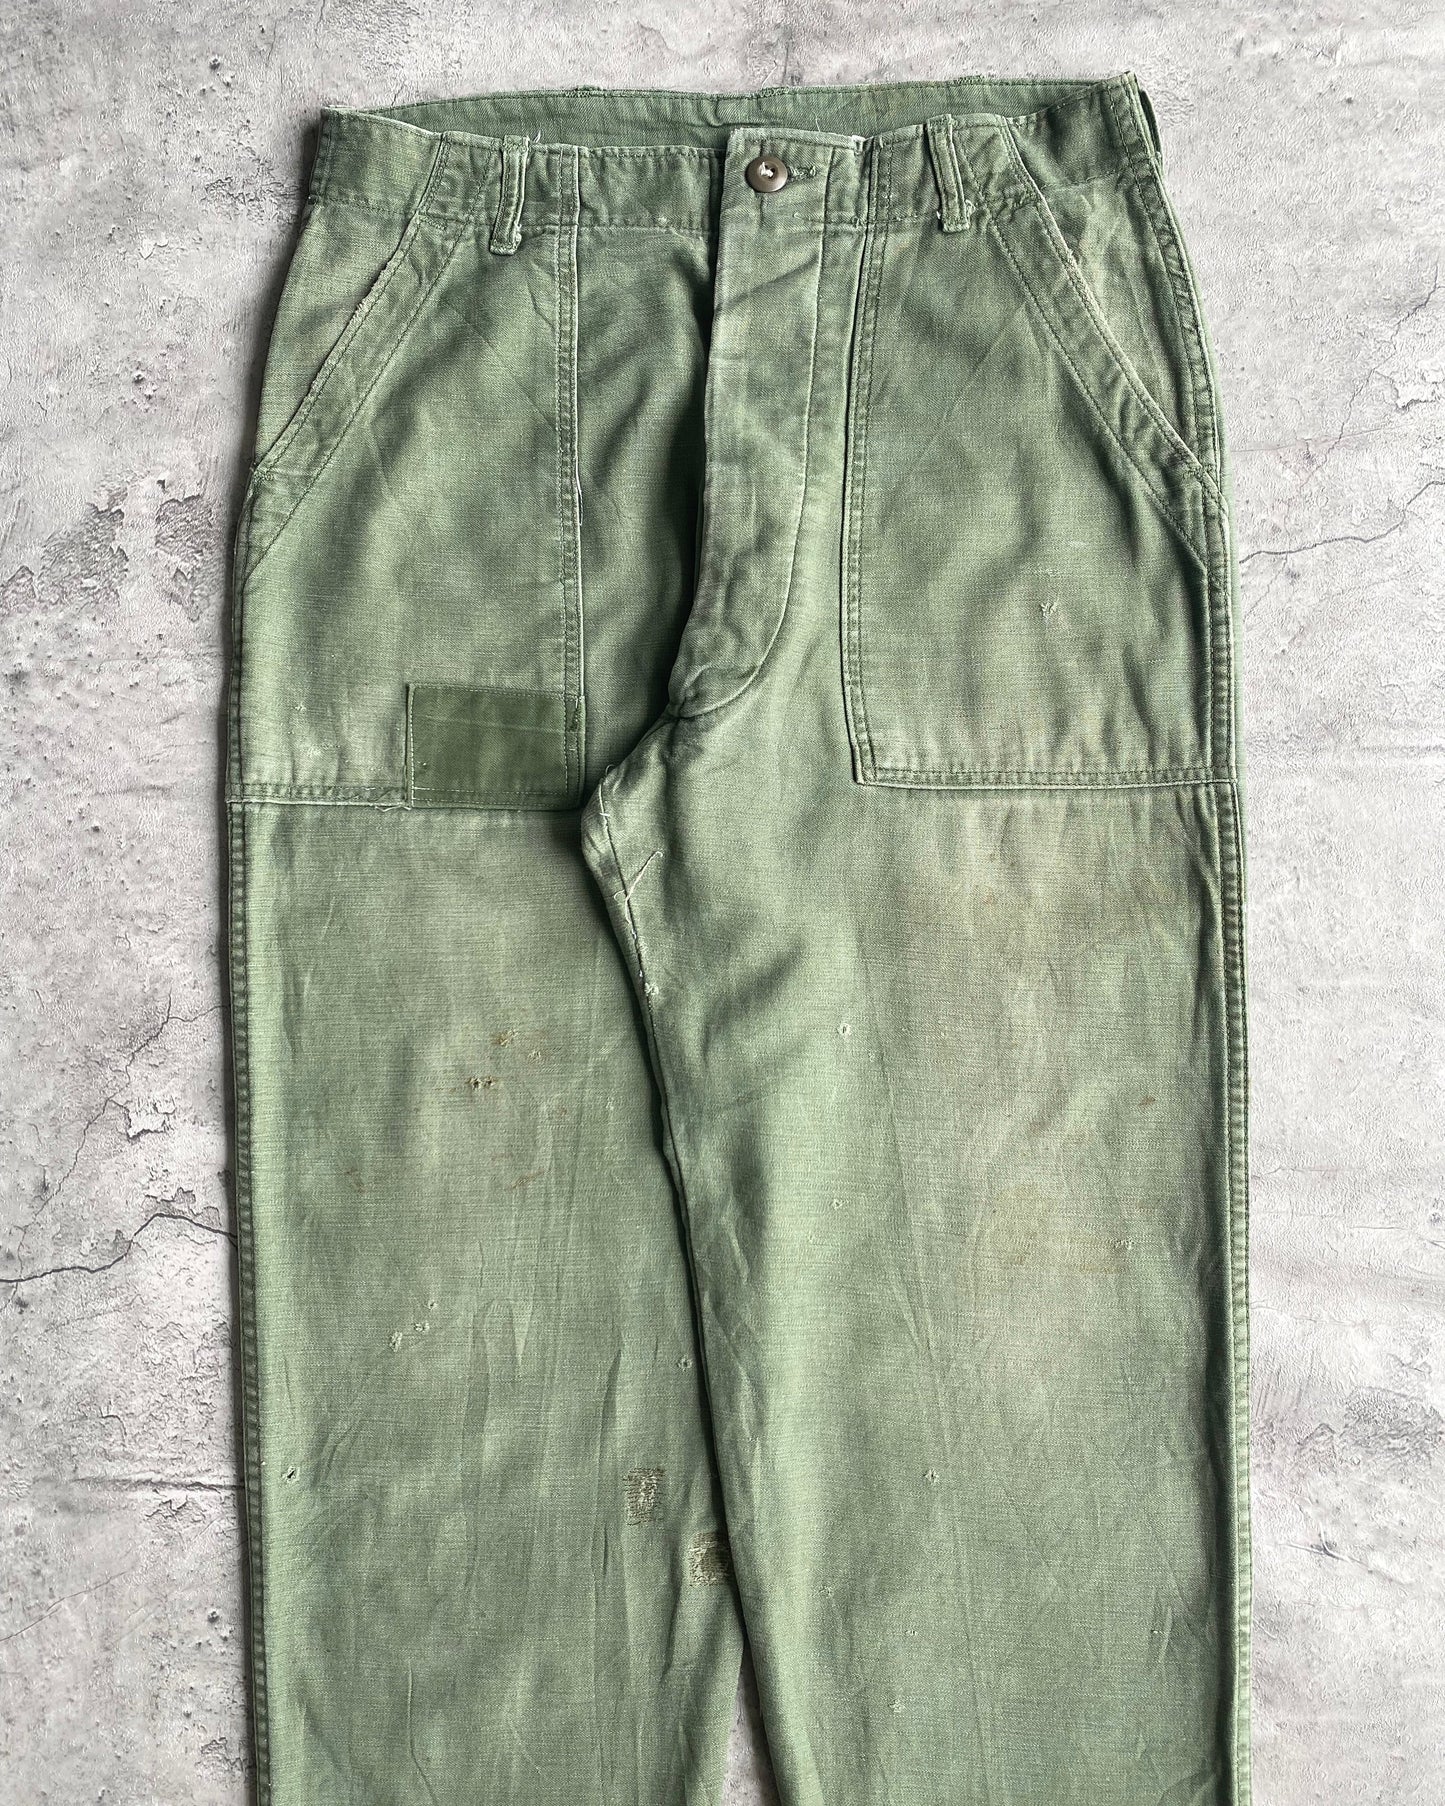 1960S REPAIRED OG-107 SATEEN US ARMY TROUSERS (32X33)